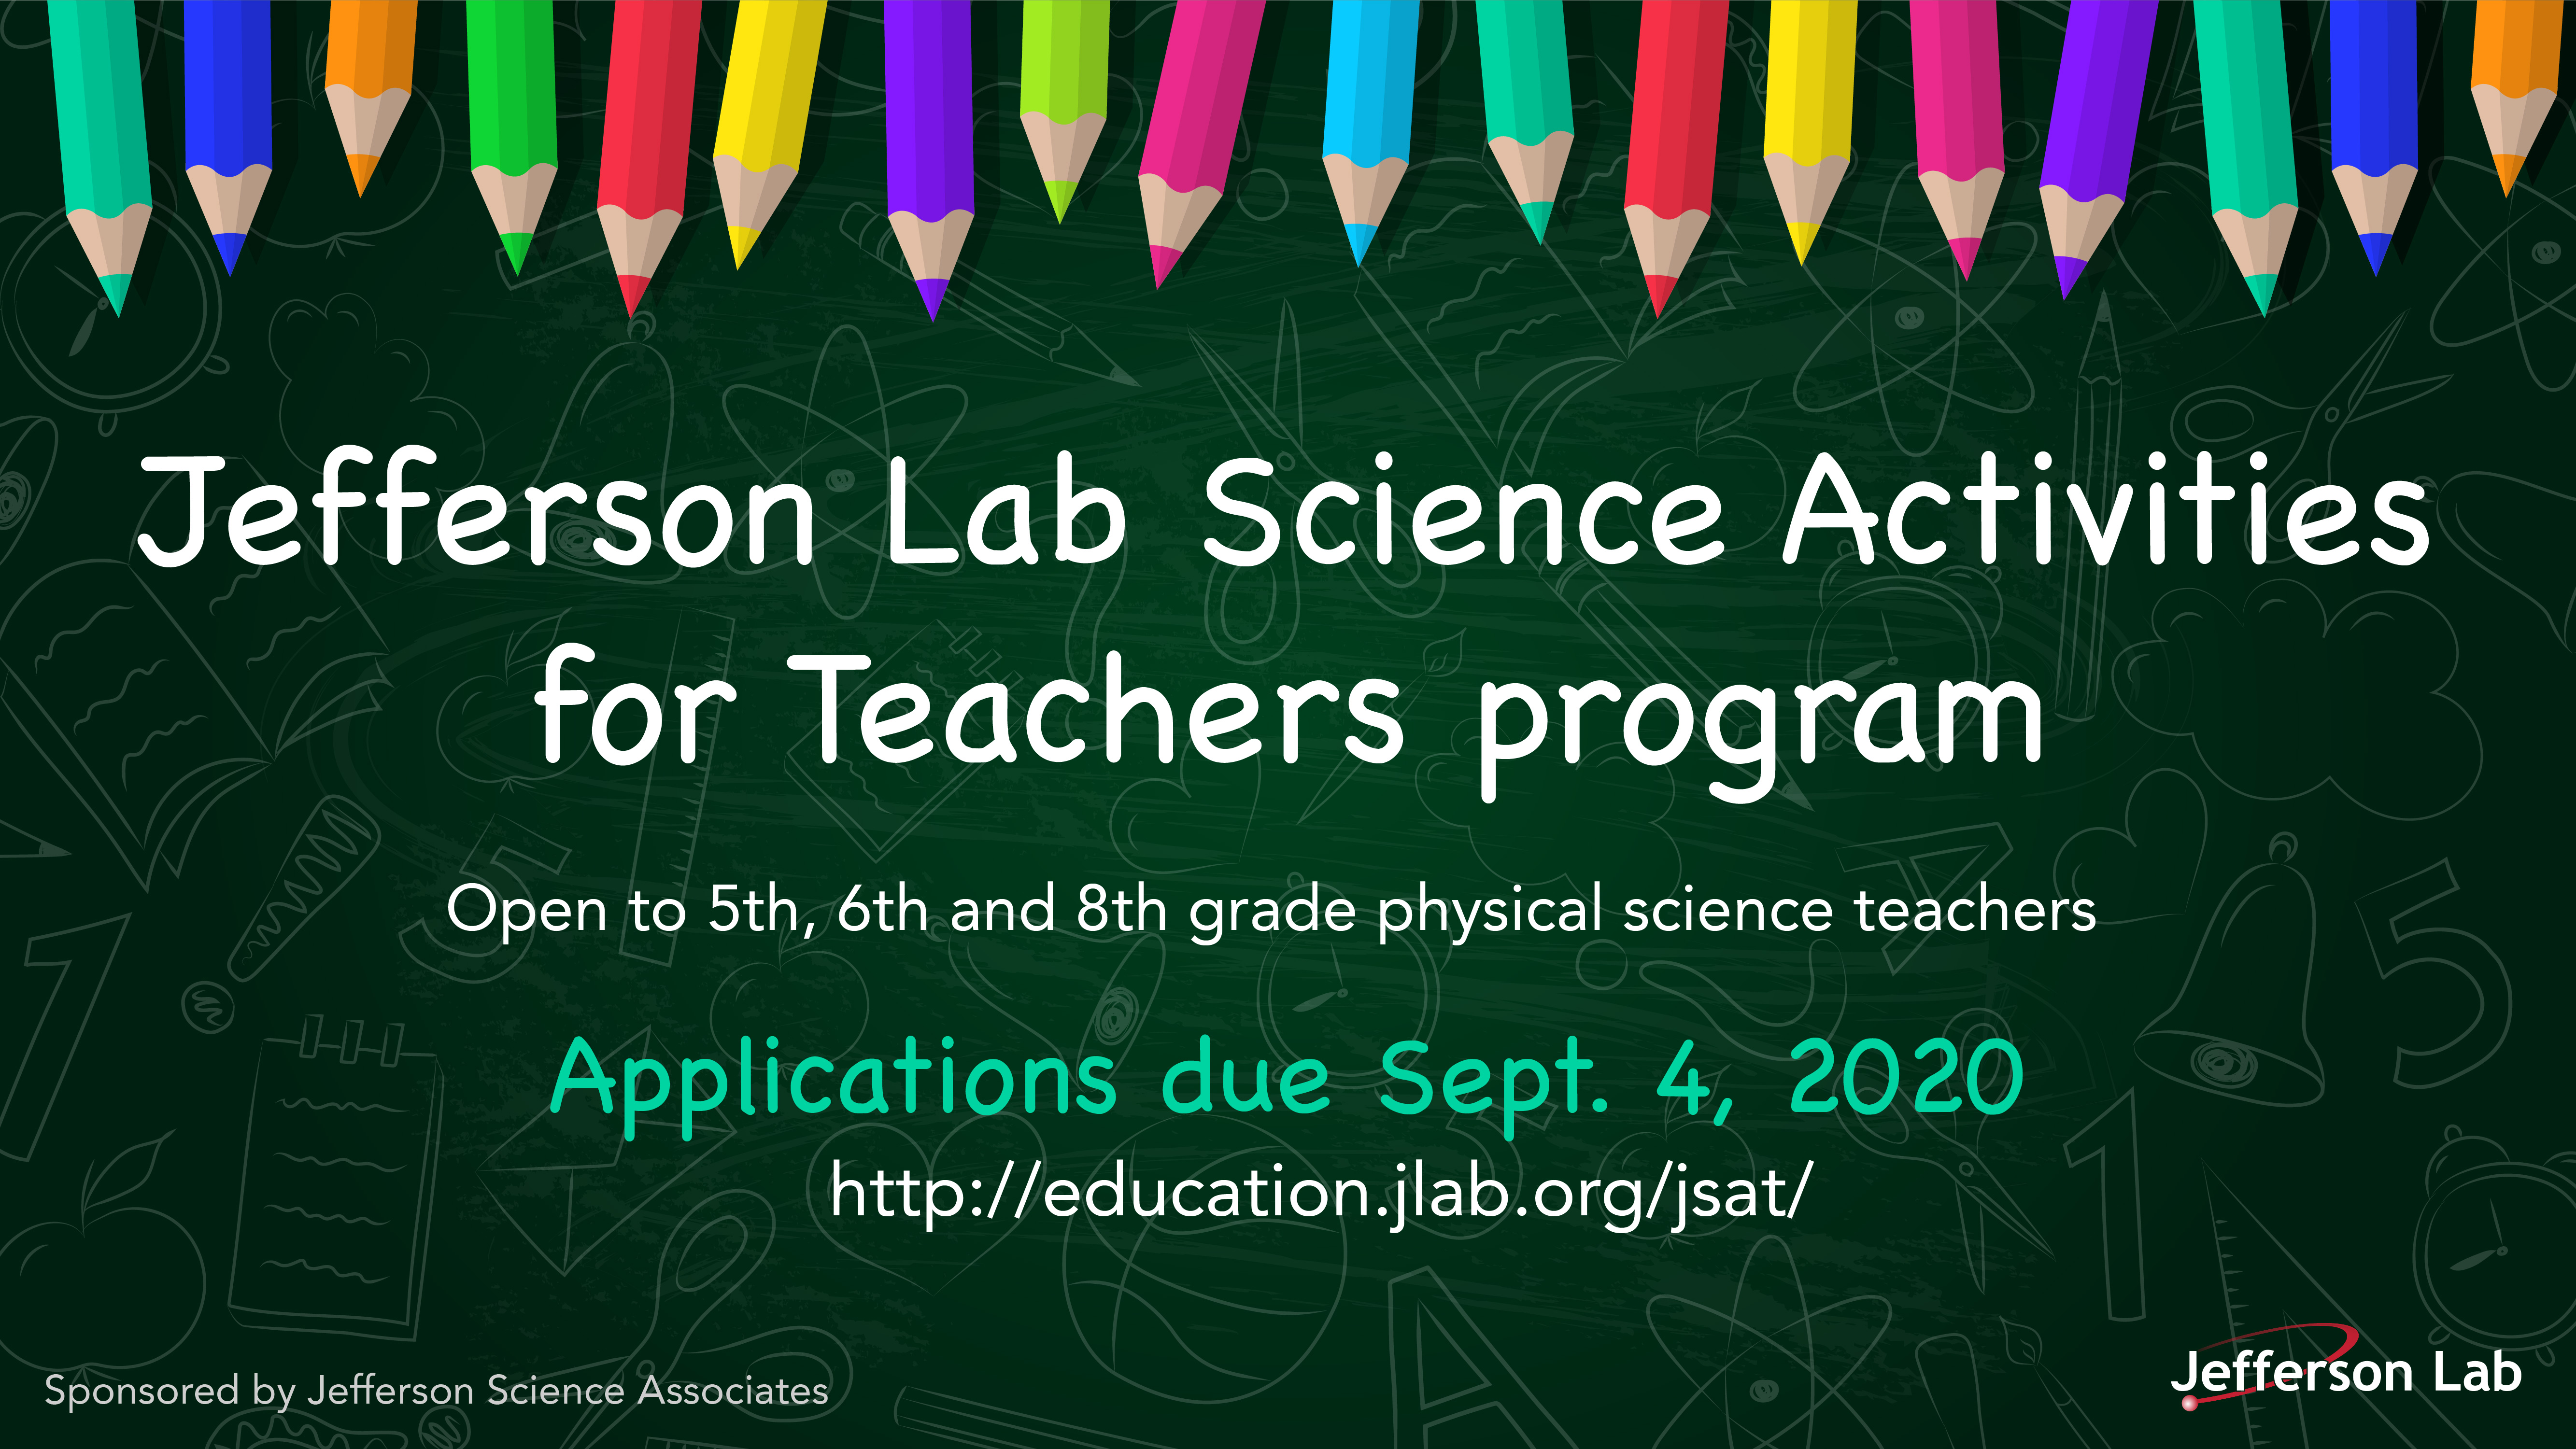 Jefferson Lab Science Activities for Teachers Program is now accepting applications, due Sept. 4. Apply online. For more information, see the website or email surles@jlab.org